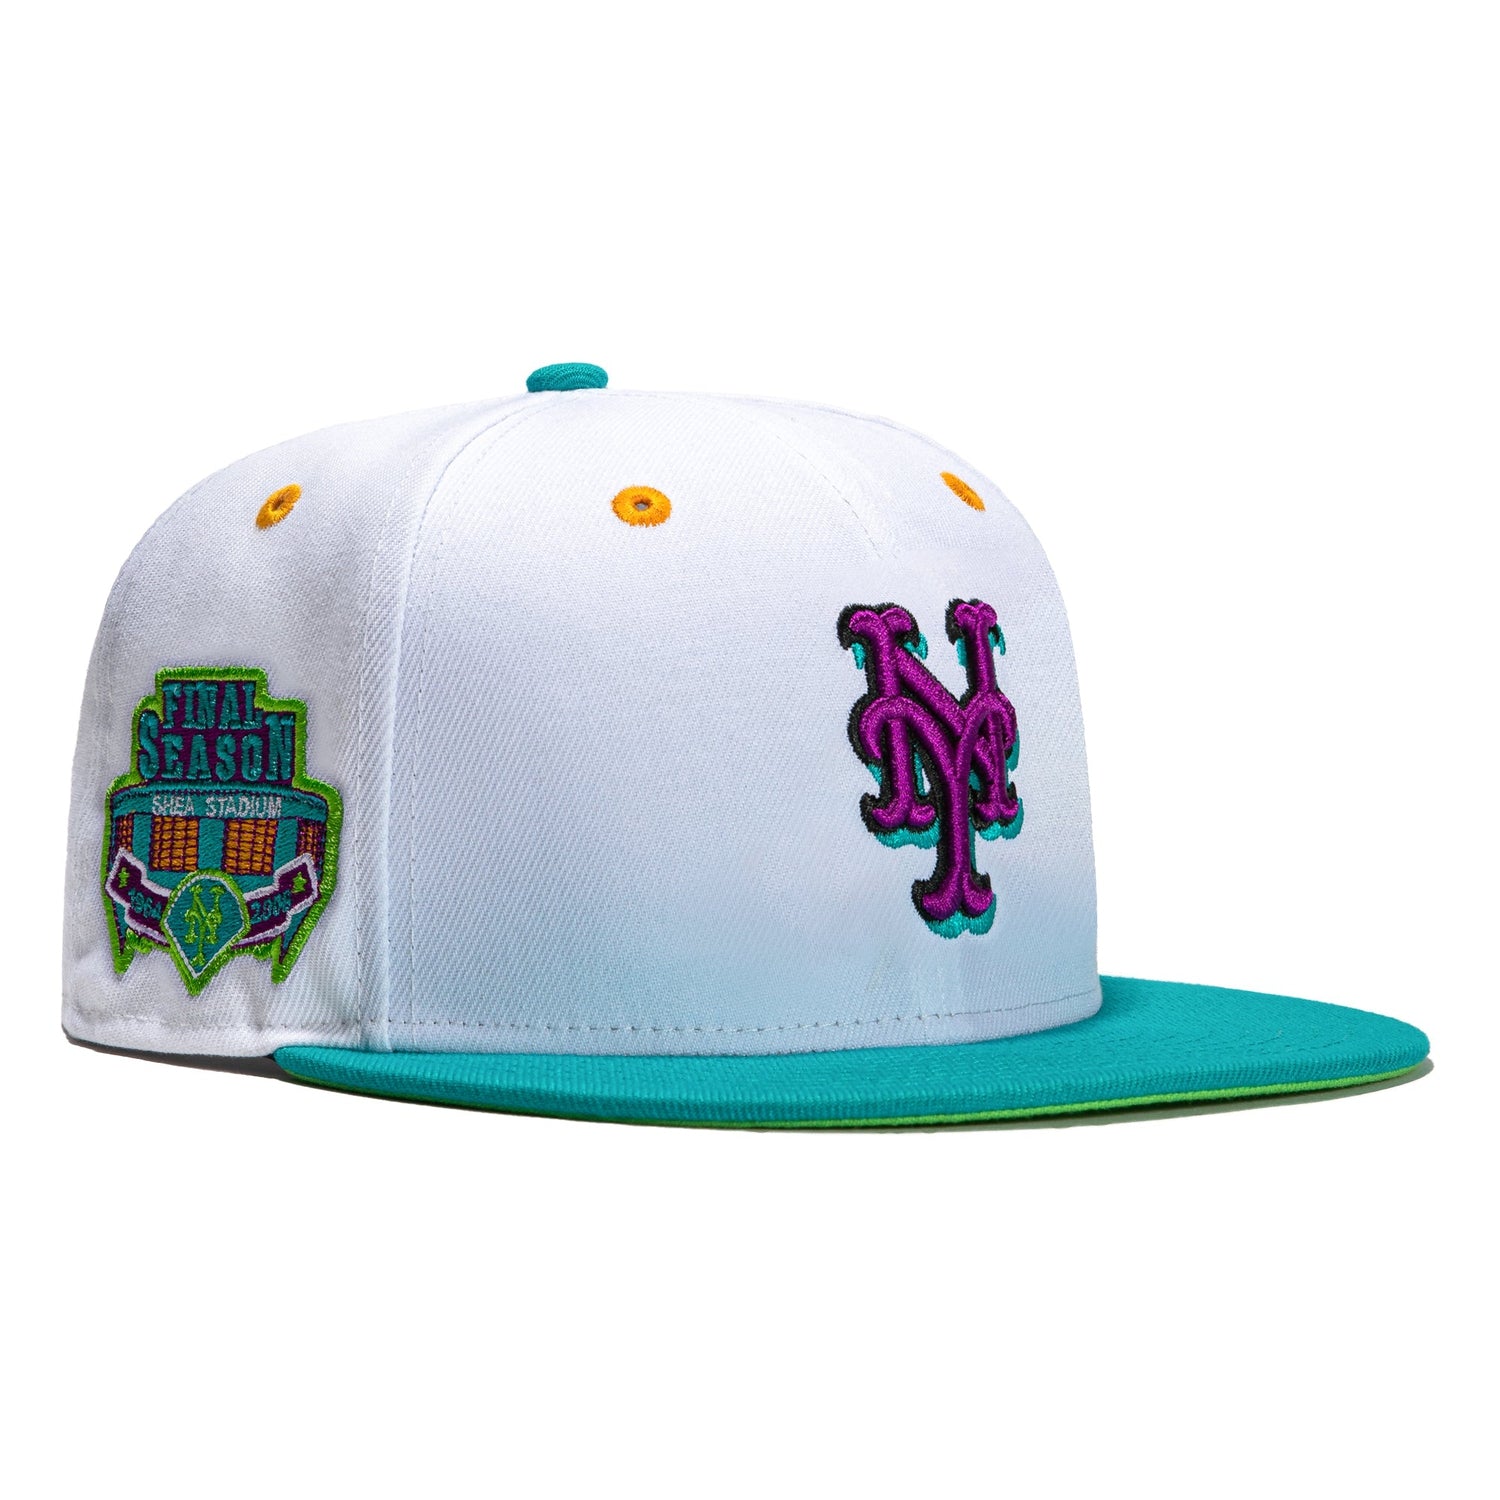 New Era 59FIFTY Teal Lime New York Mets Final Season Patch Hat - White, Teal White/Teal / 7 1/8